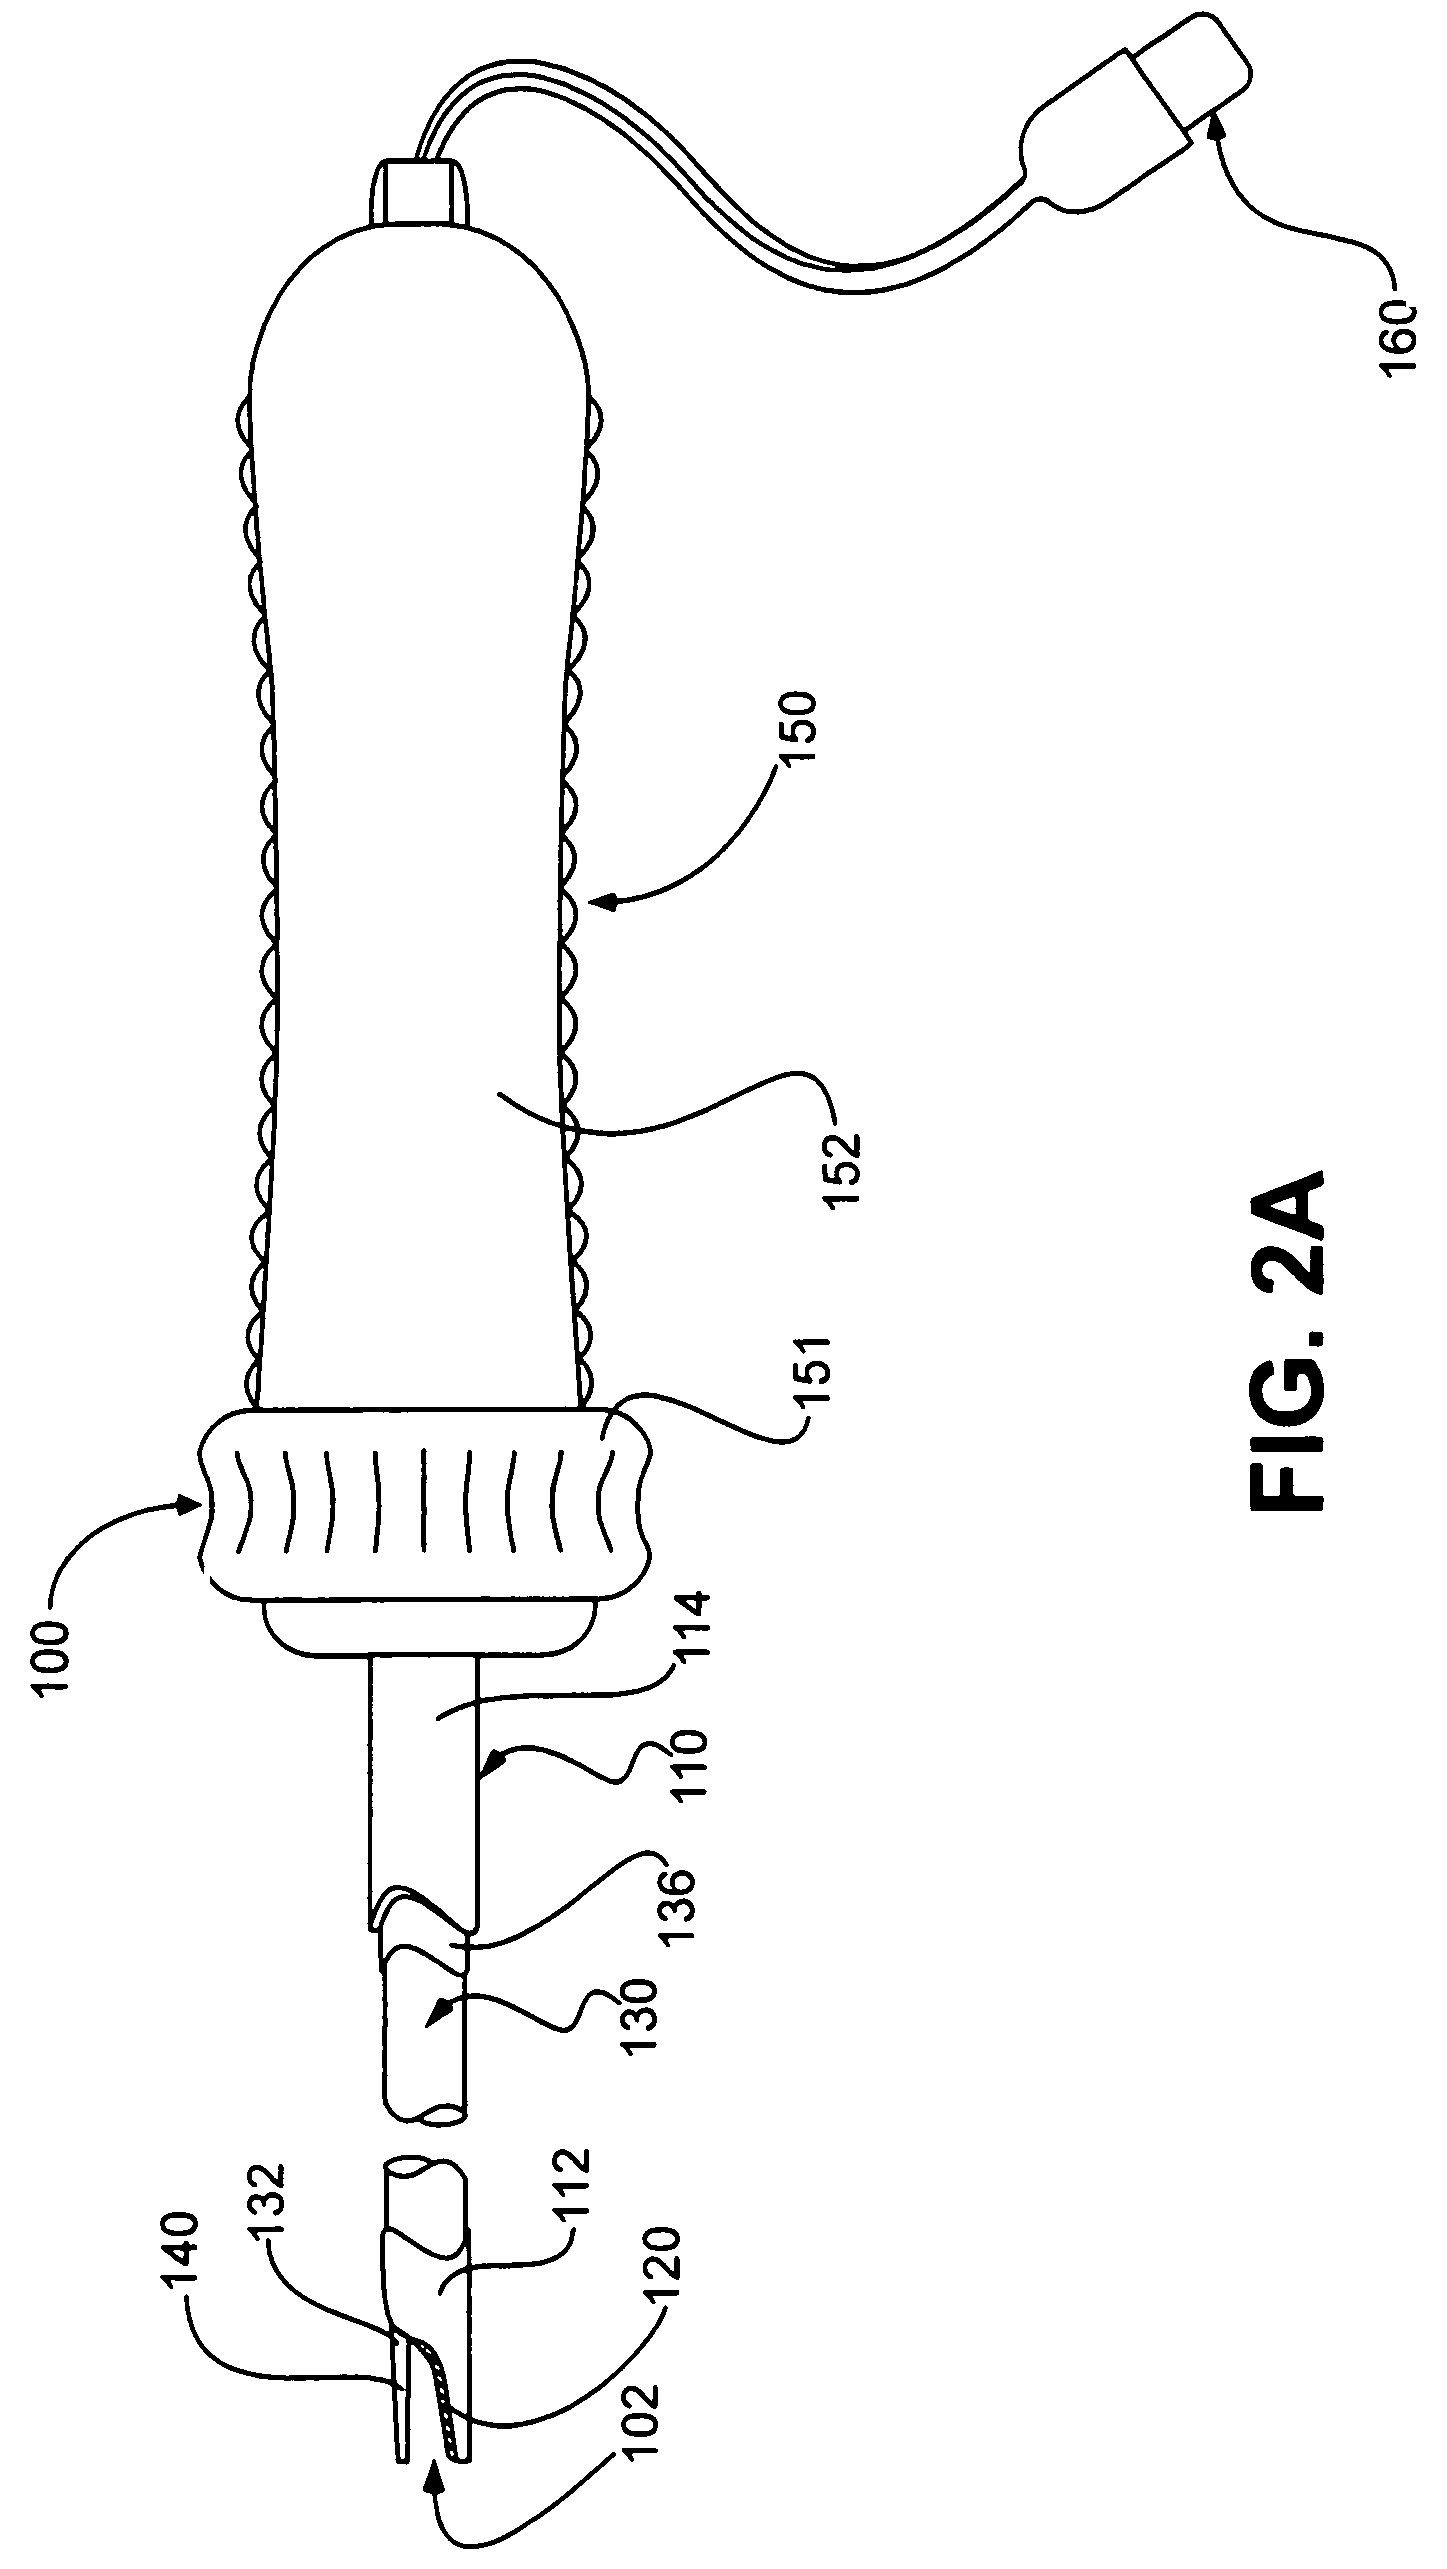 Apparatus and method for minimally invasive surgery using rotational cutting tool